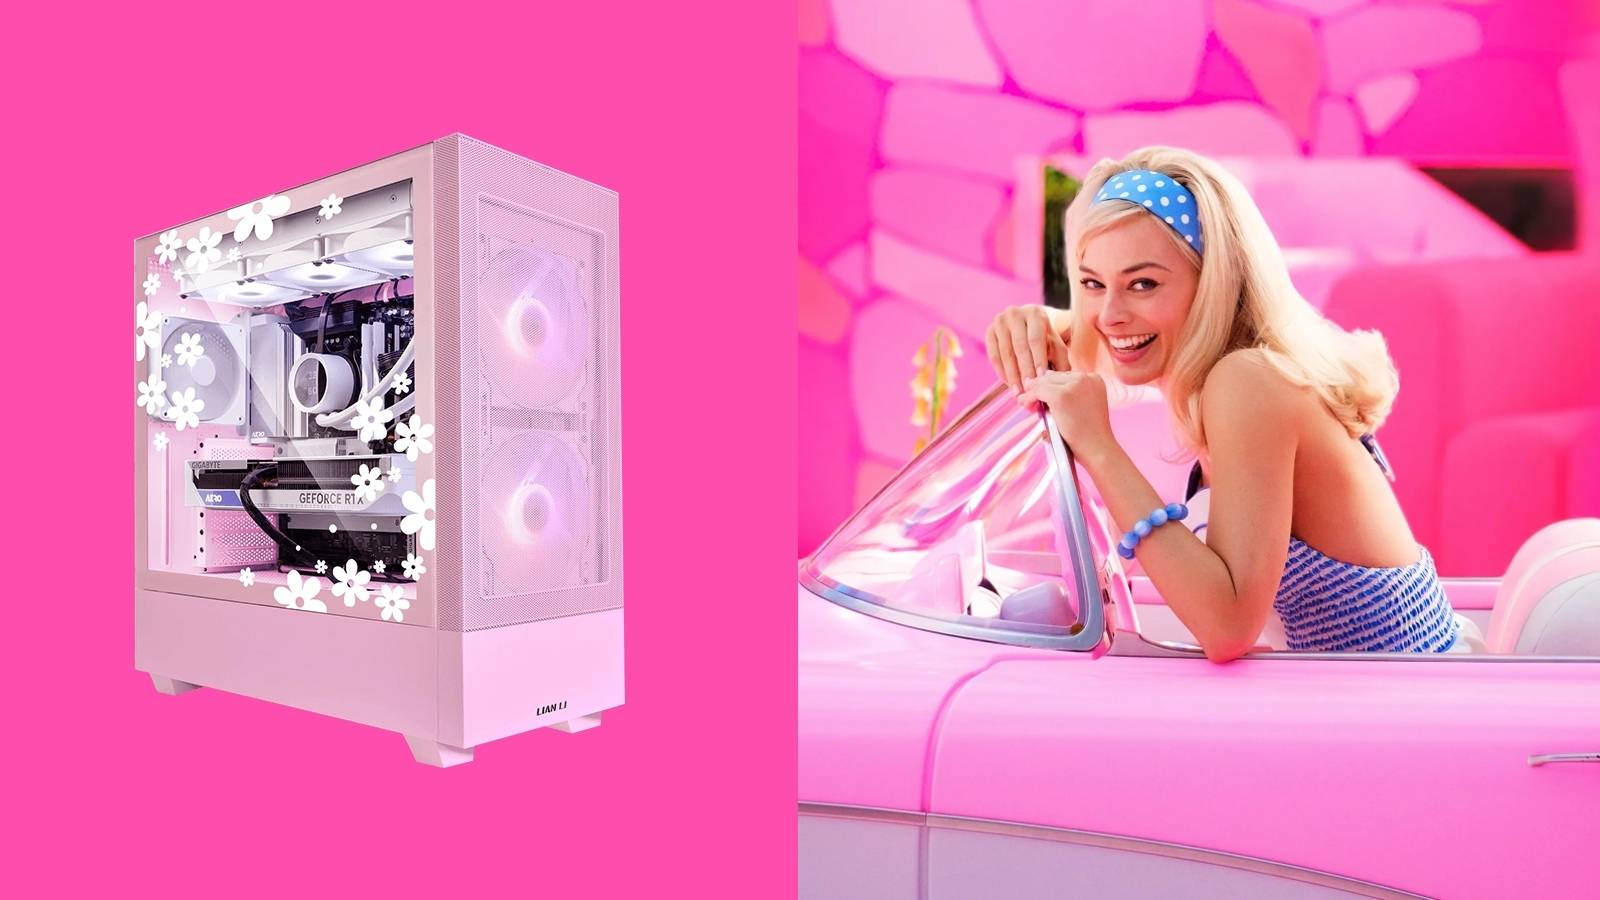 Image of a pink PC case, with Barbie from the Warner Bros Barbie movie on the right-hand side.